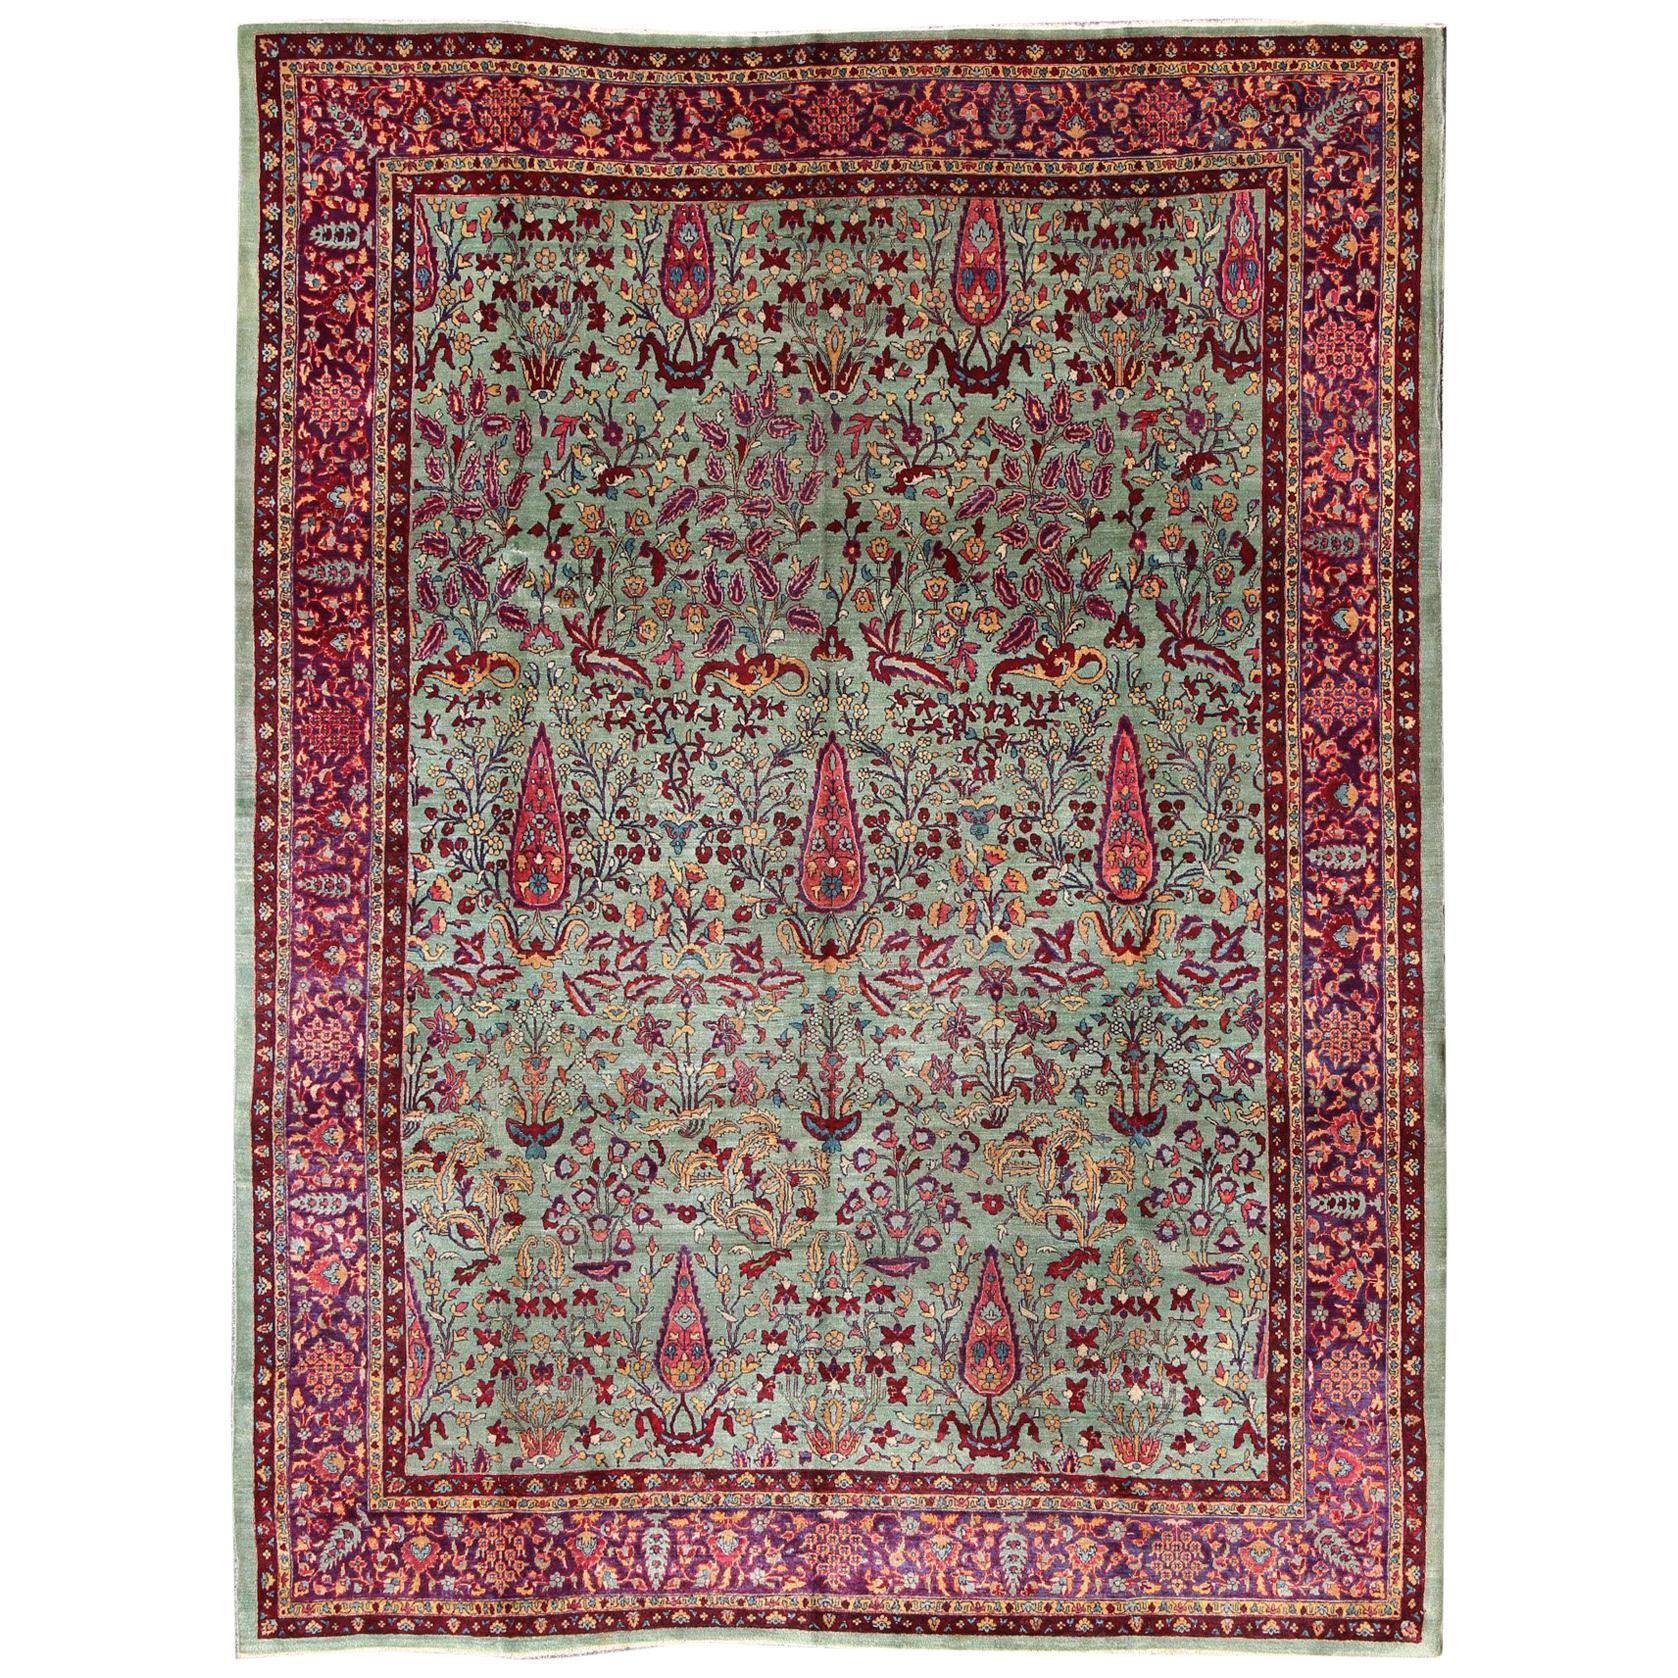 Antique Agra Rug with Branching Floral Design in Mint Green, Purple and Burgundy For Sale